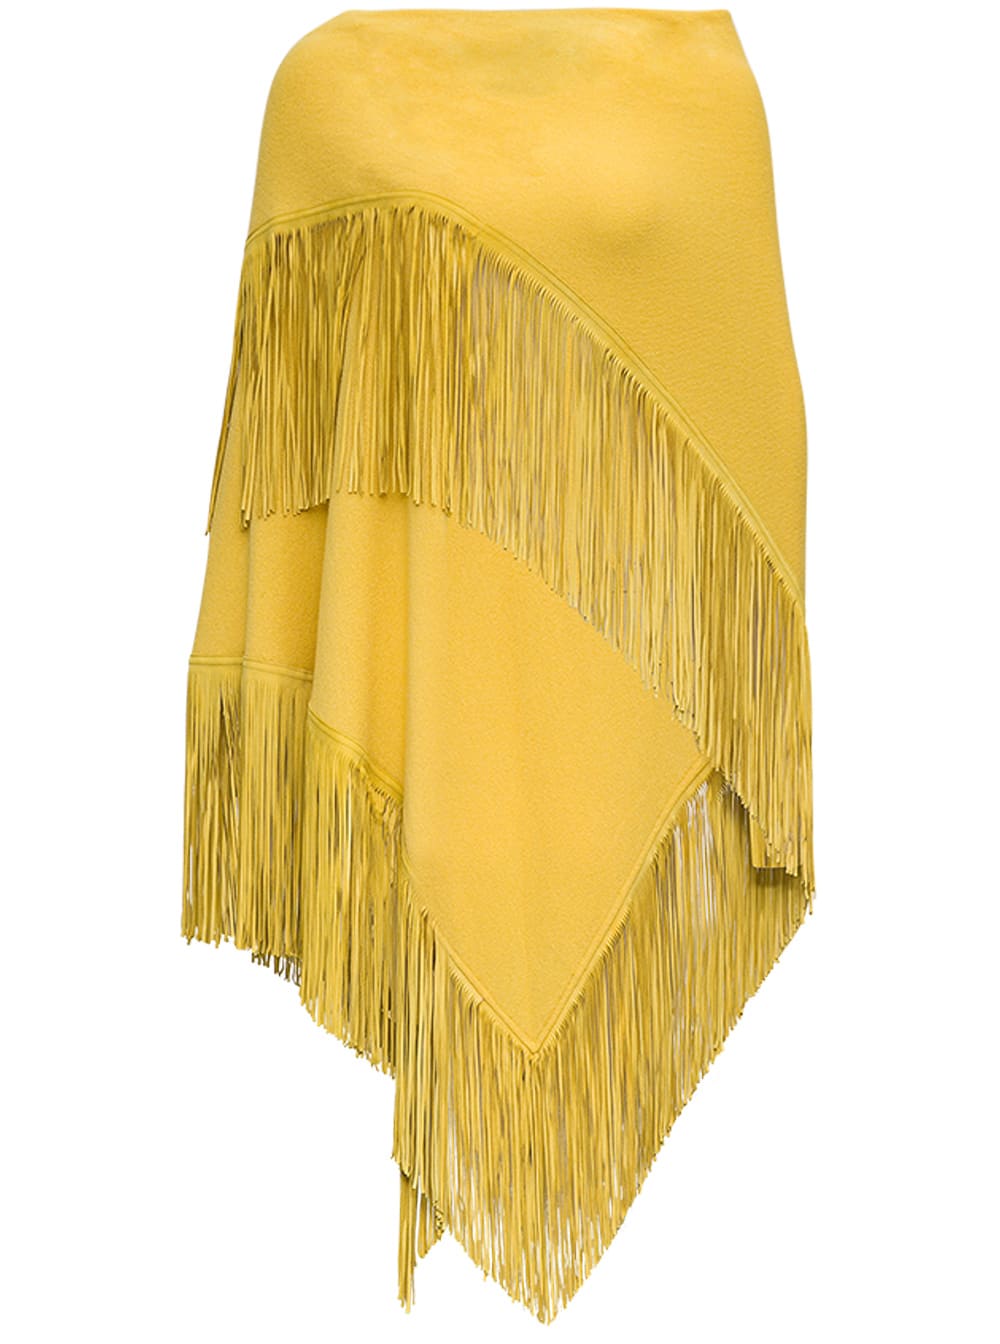 Mixik Yellow Cashmere Cape With Fringes